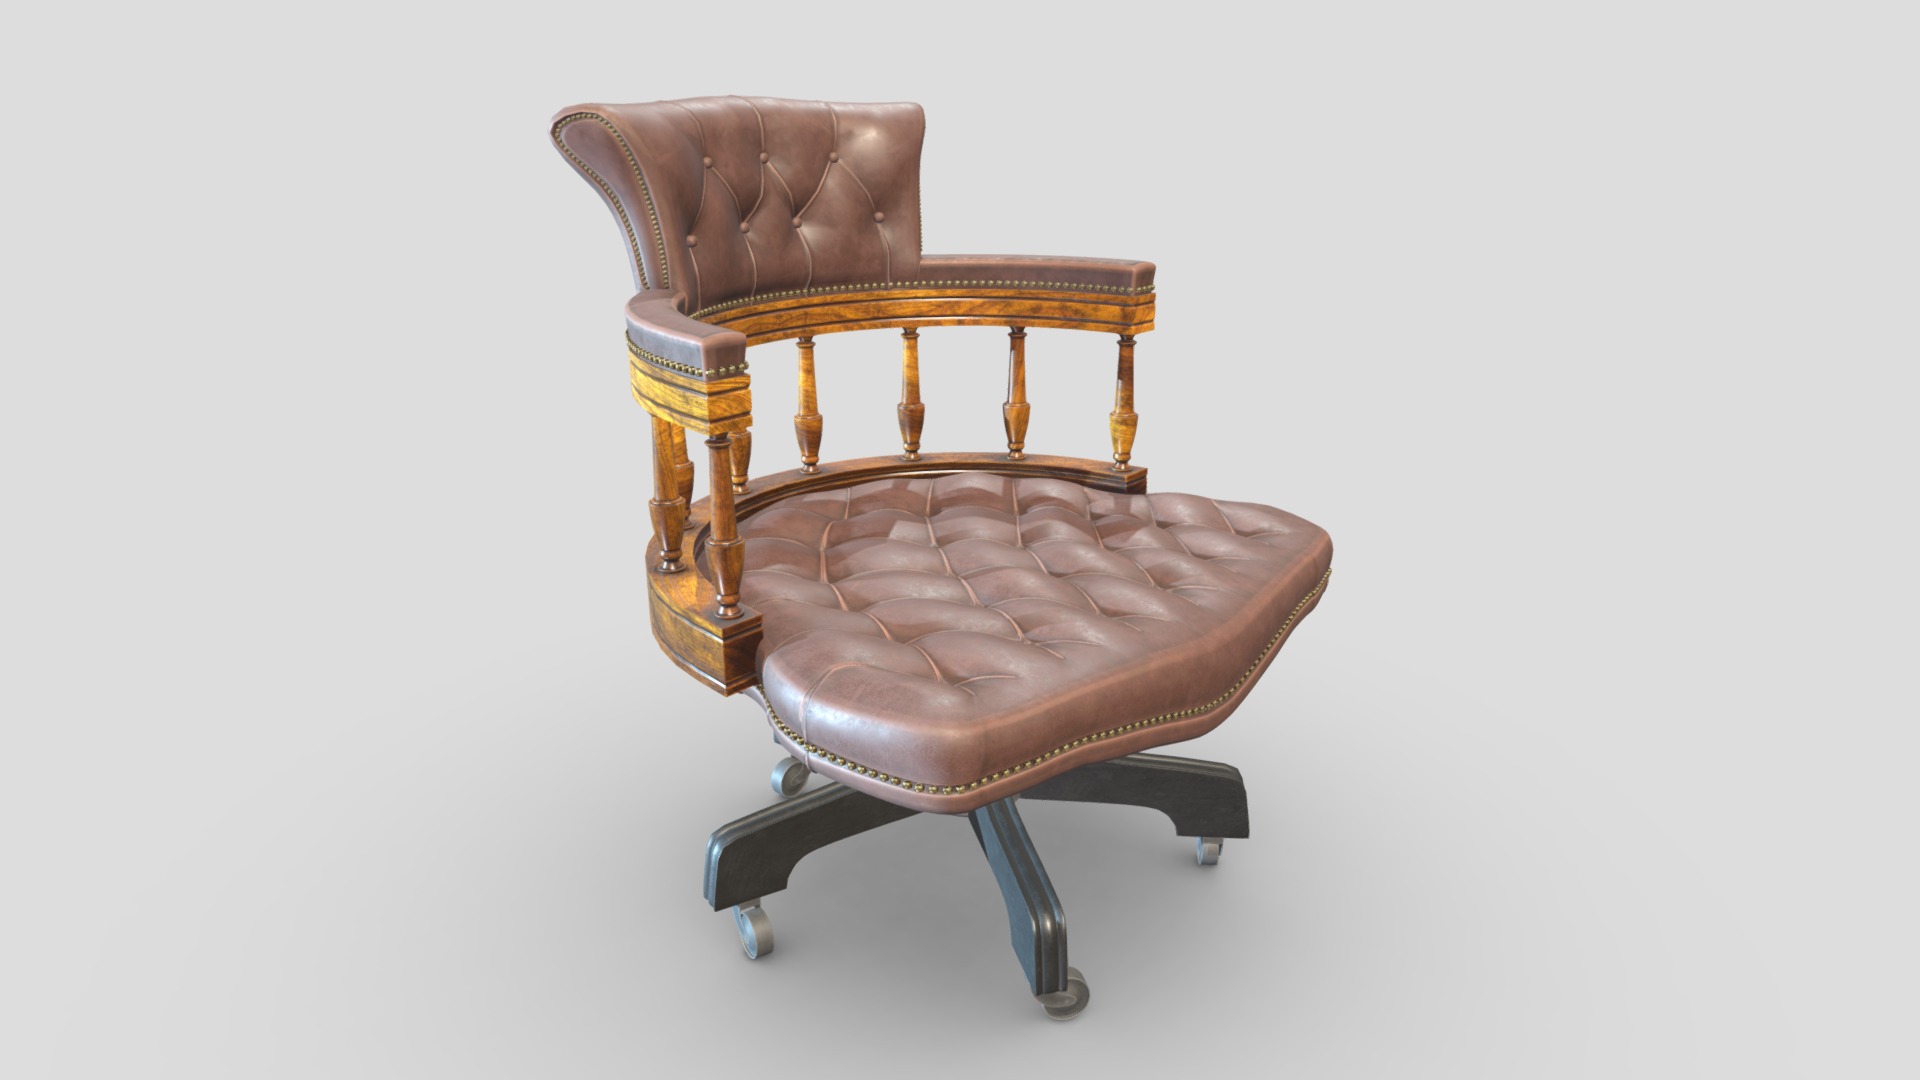 3D model Arm Chair  23 - This is a 3D model of the Arm Chair  23. The 3D model is about a brown leather chair.